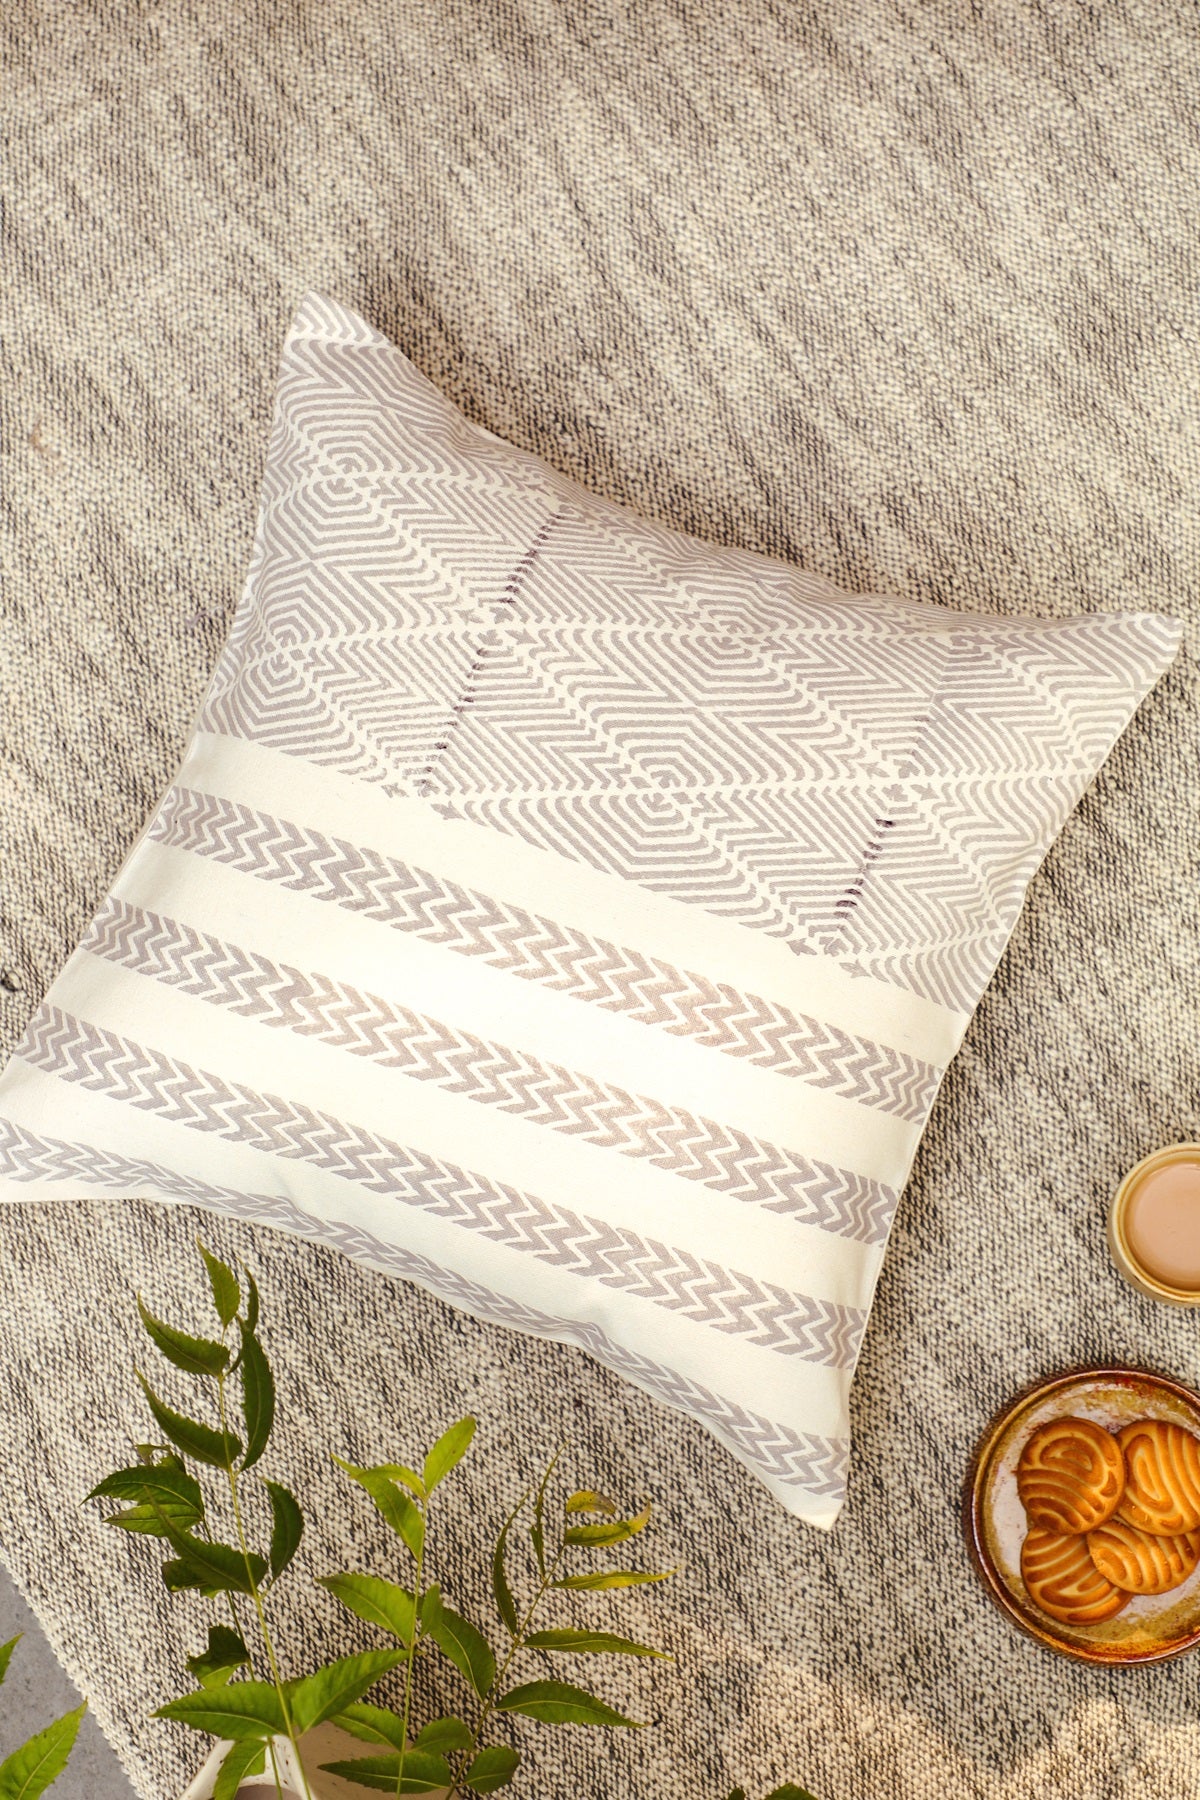 Aaira Small Grey Patterned Cushion Cover